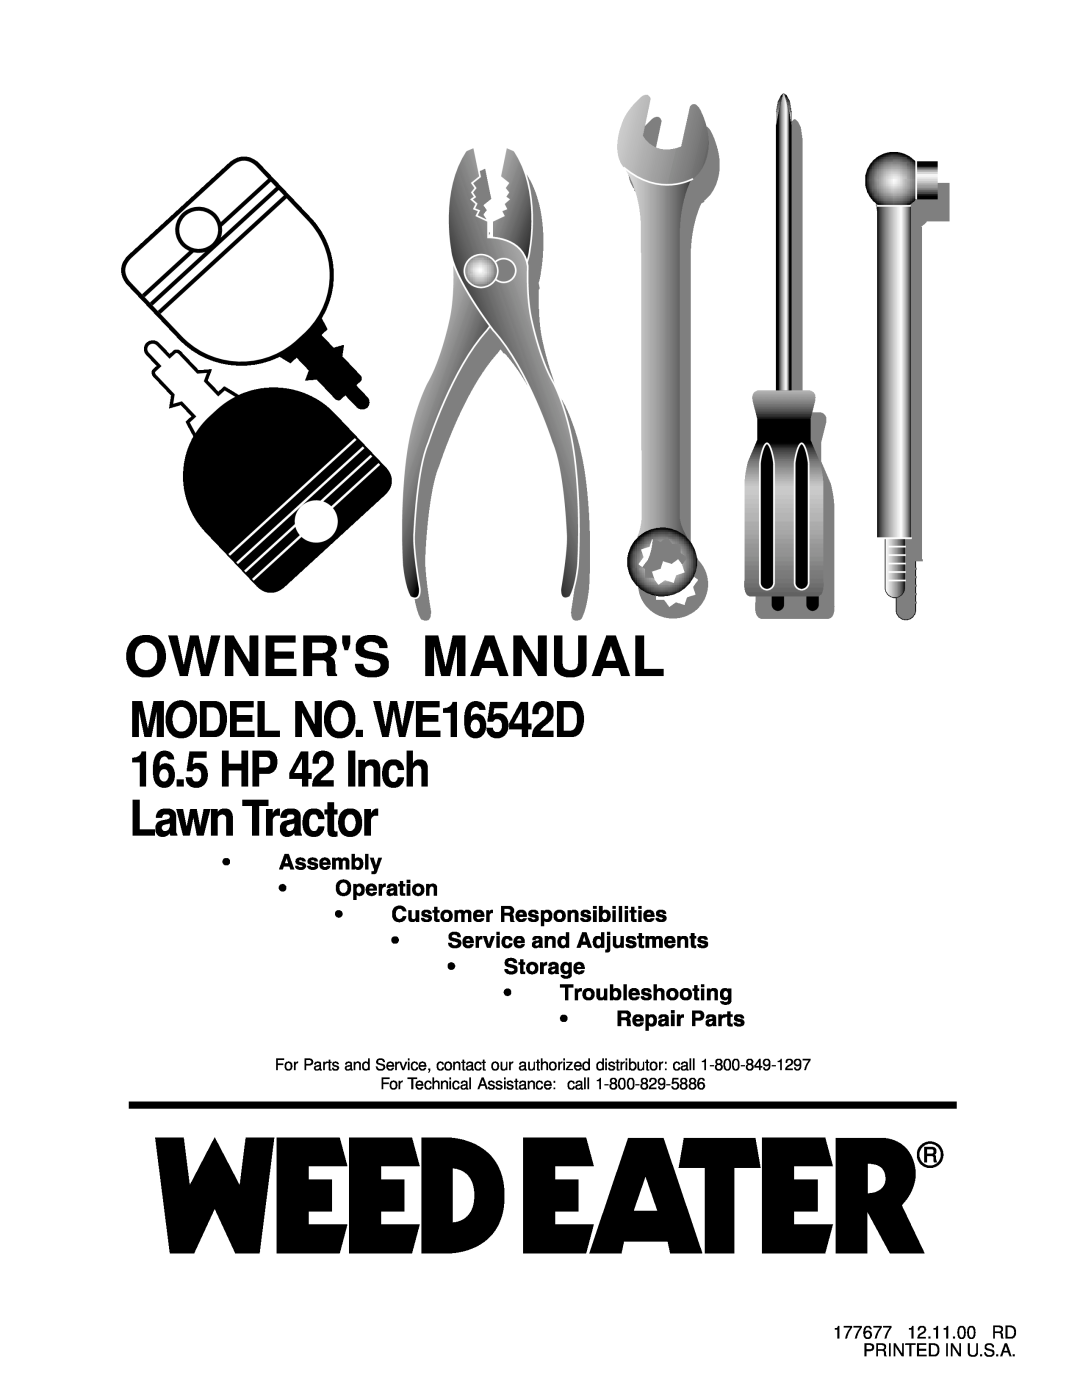 Weed Eater 177677 owner manual MODEL NO. WE16542D 16.5HP 42 Inch Lawn Tractor 